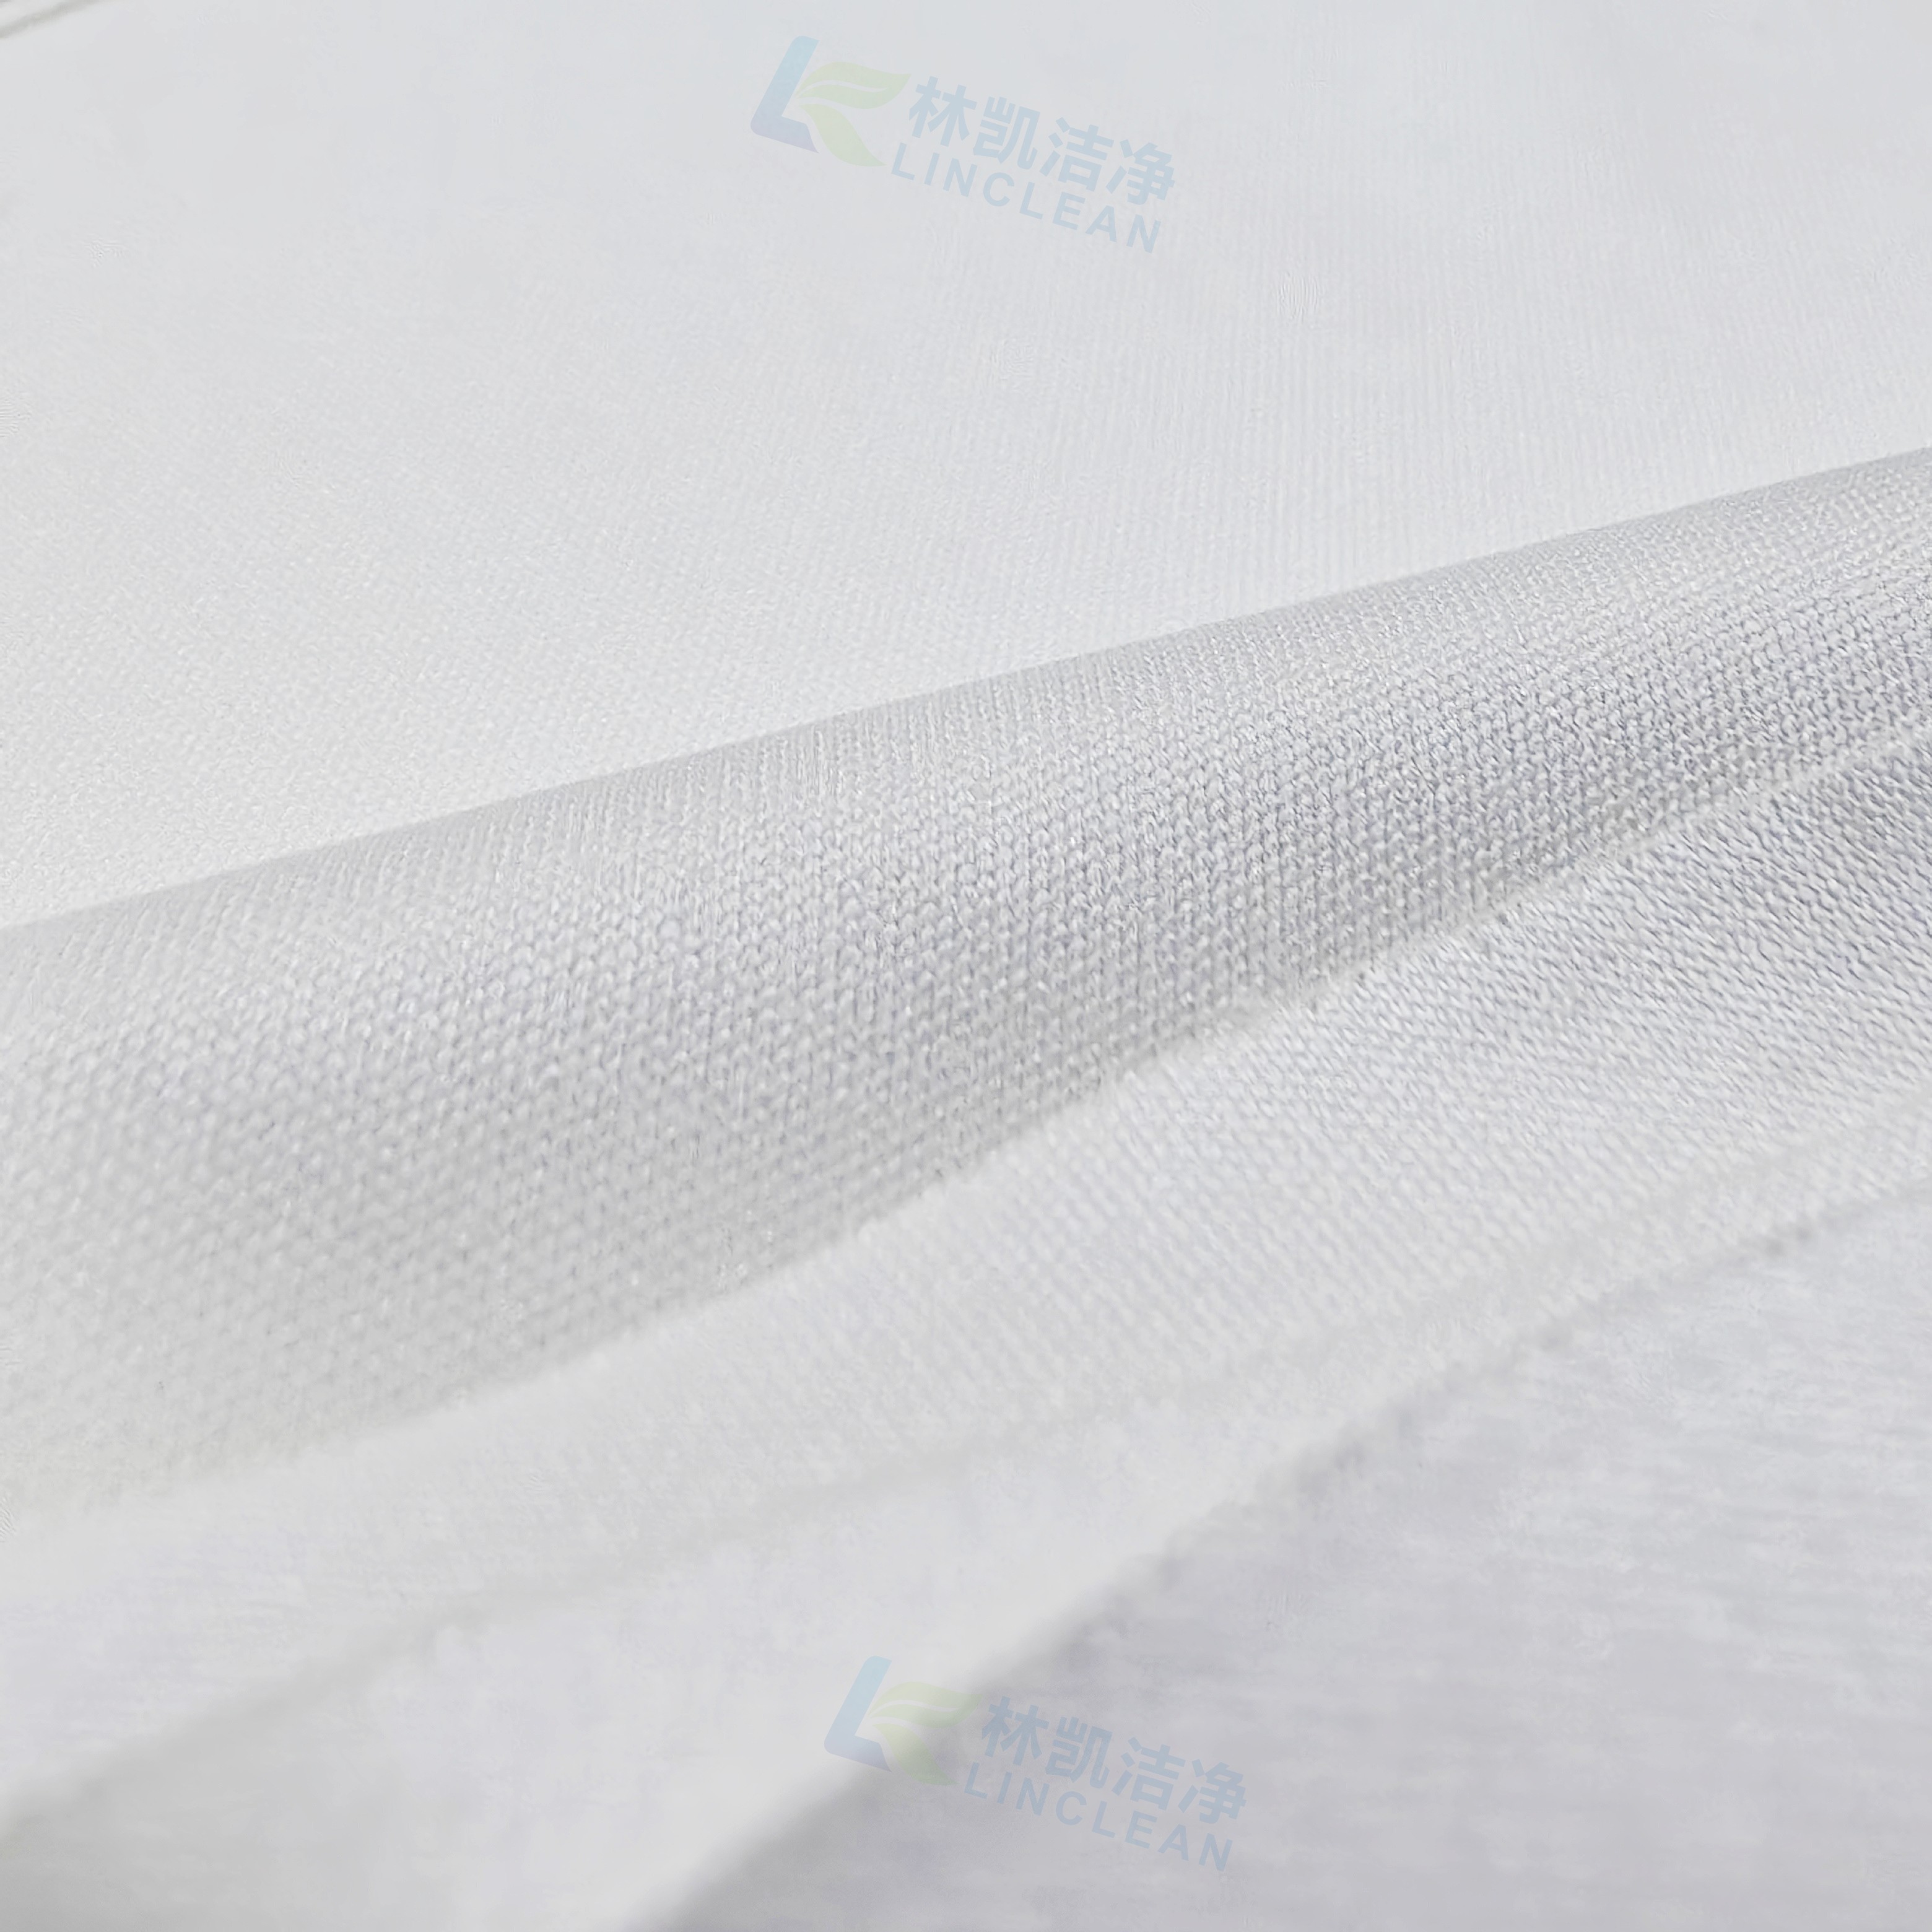 Microfiber Cleanroom Wiping Cloth With Laser Cut